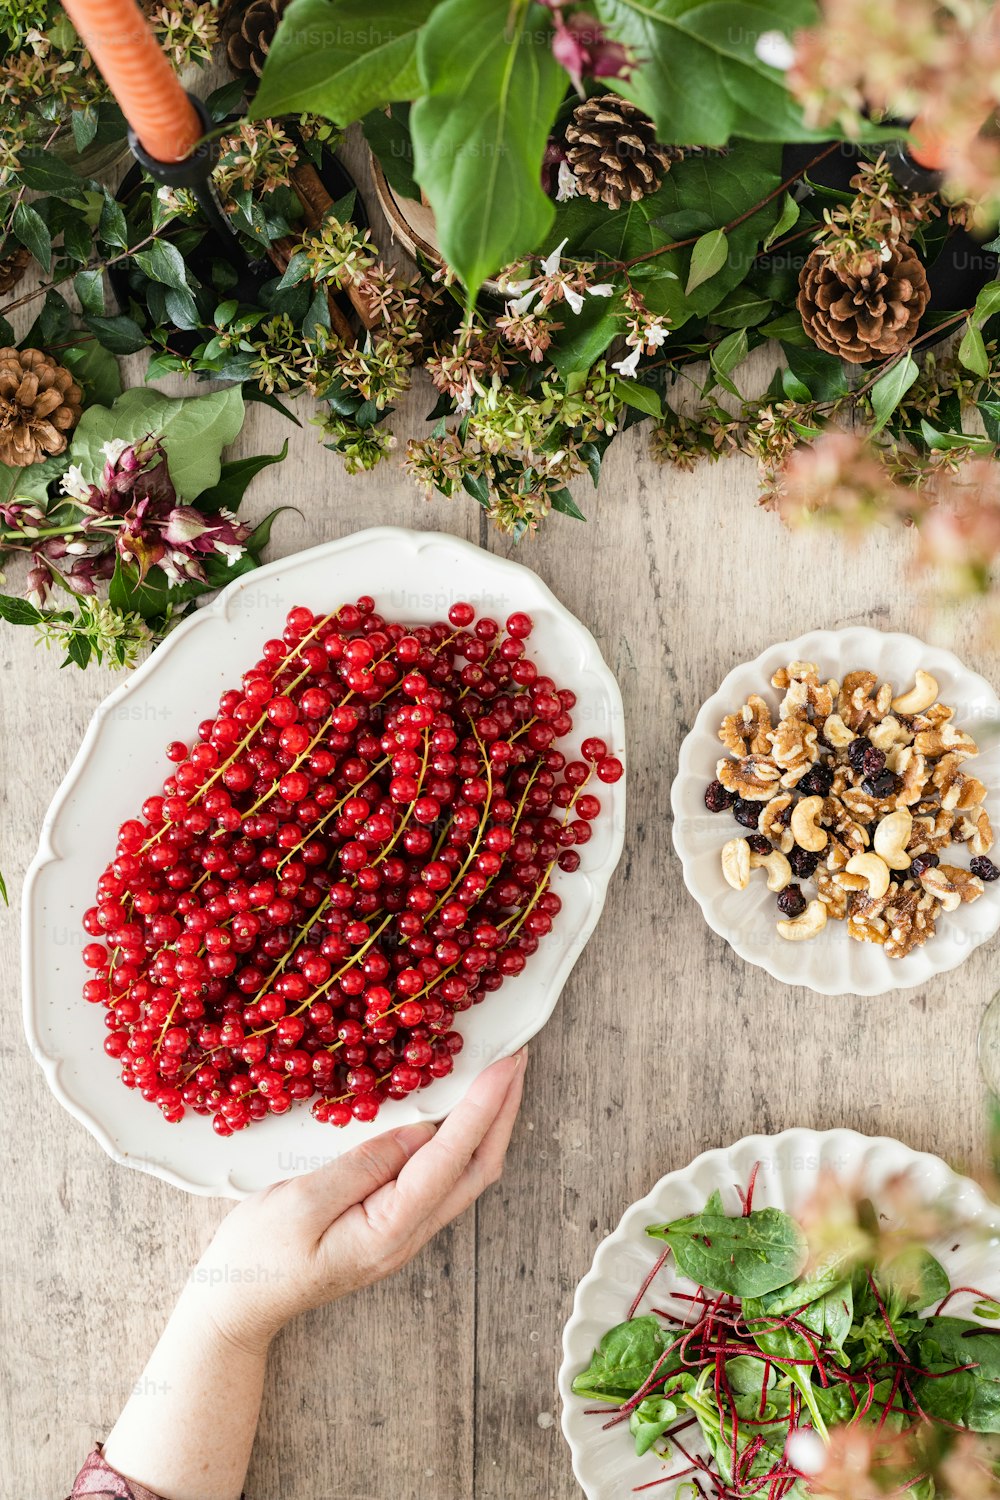 a person holding a plate of berries and nuts